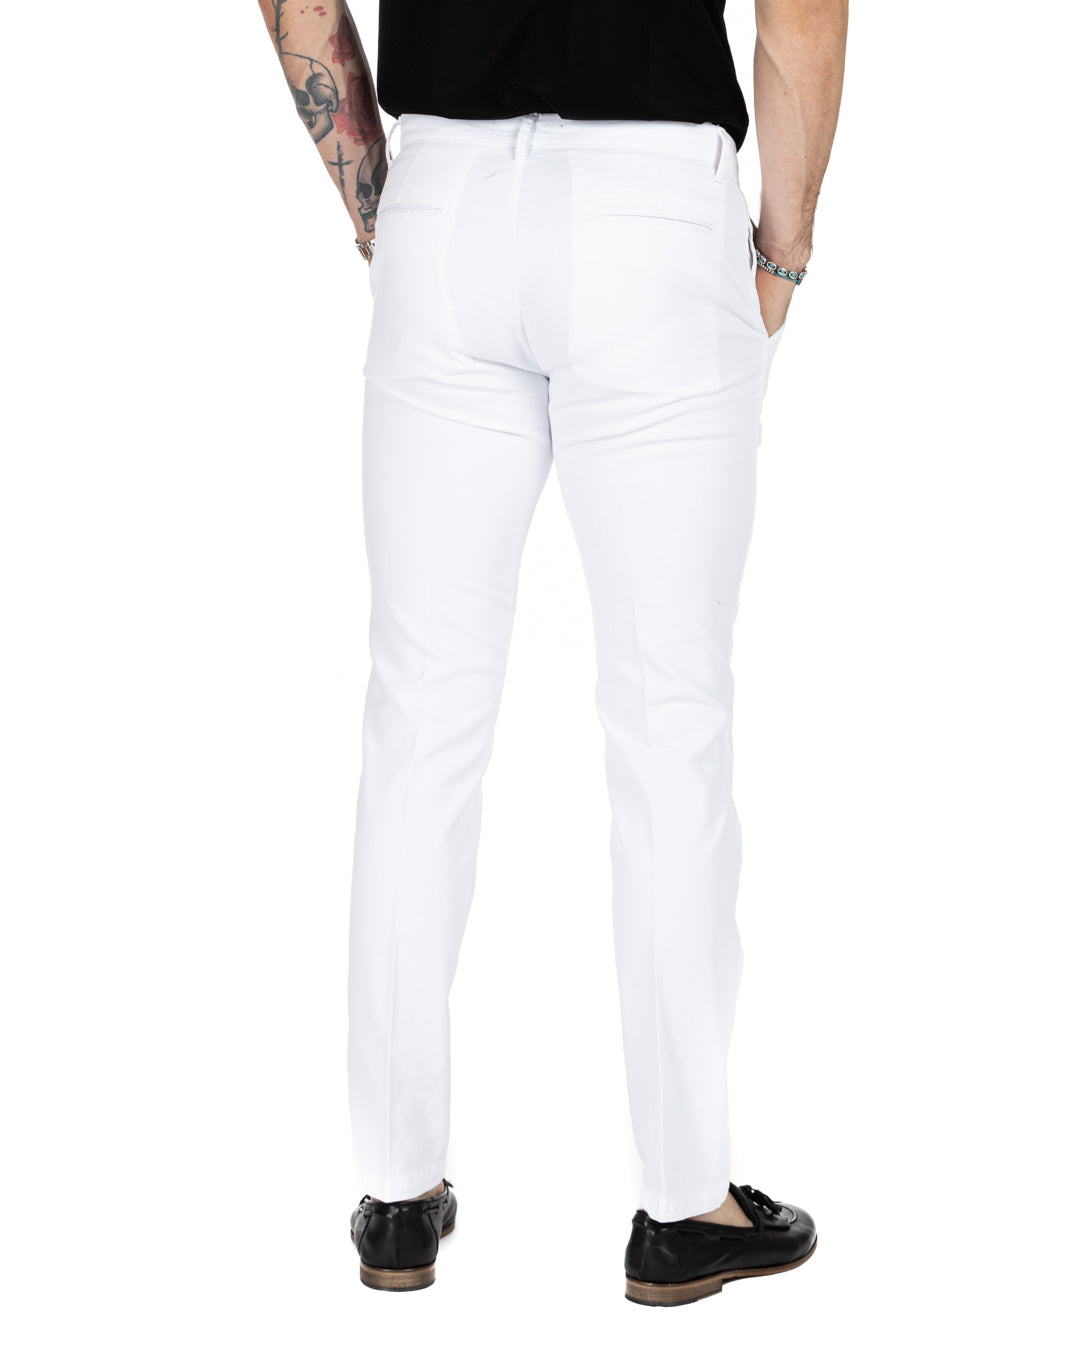 Bill - white armored trousers